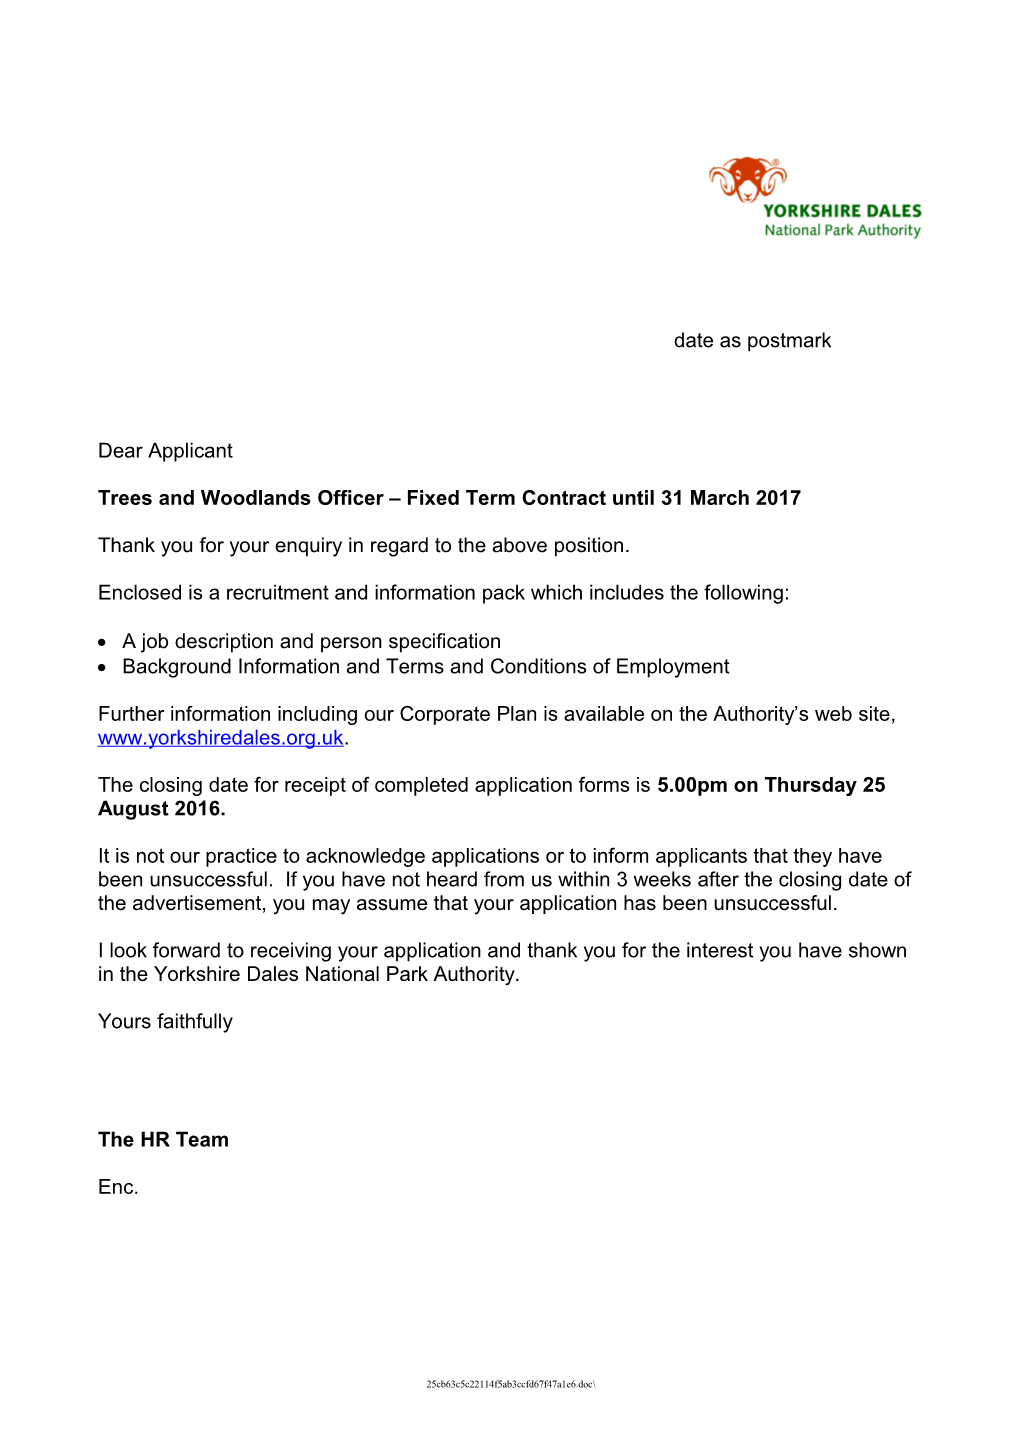 Trees and Woodlands Officer Fixed Term Contract Until 31 March 2017